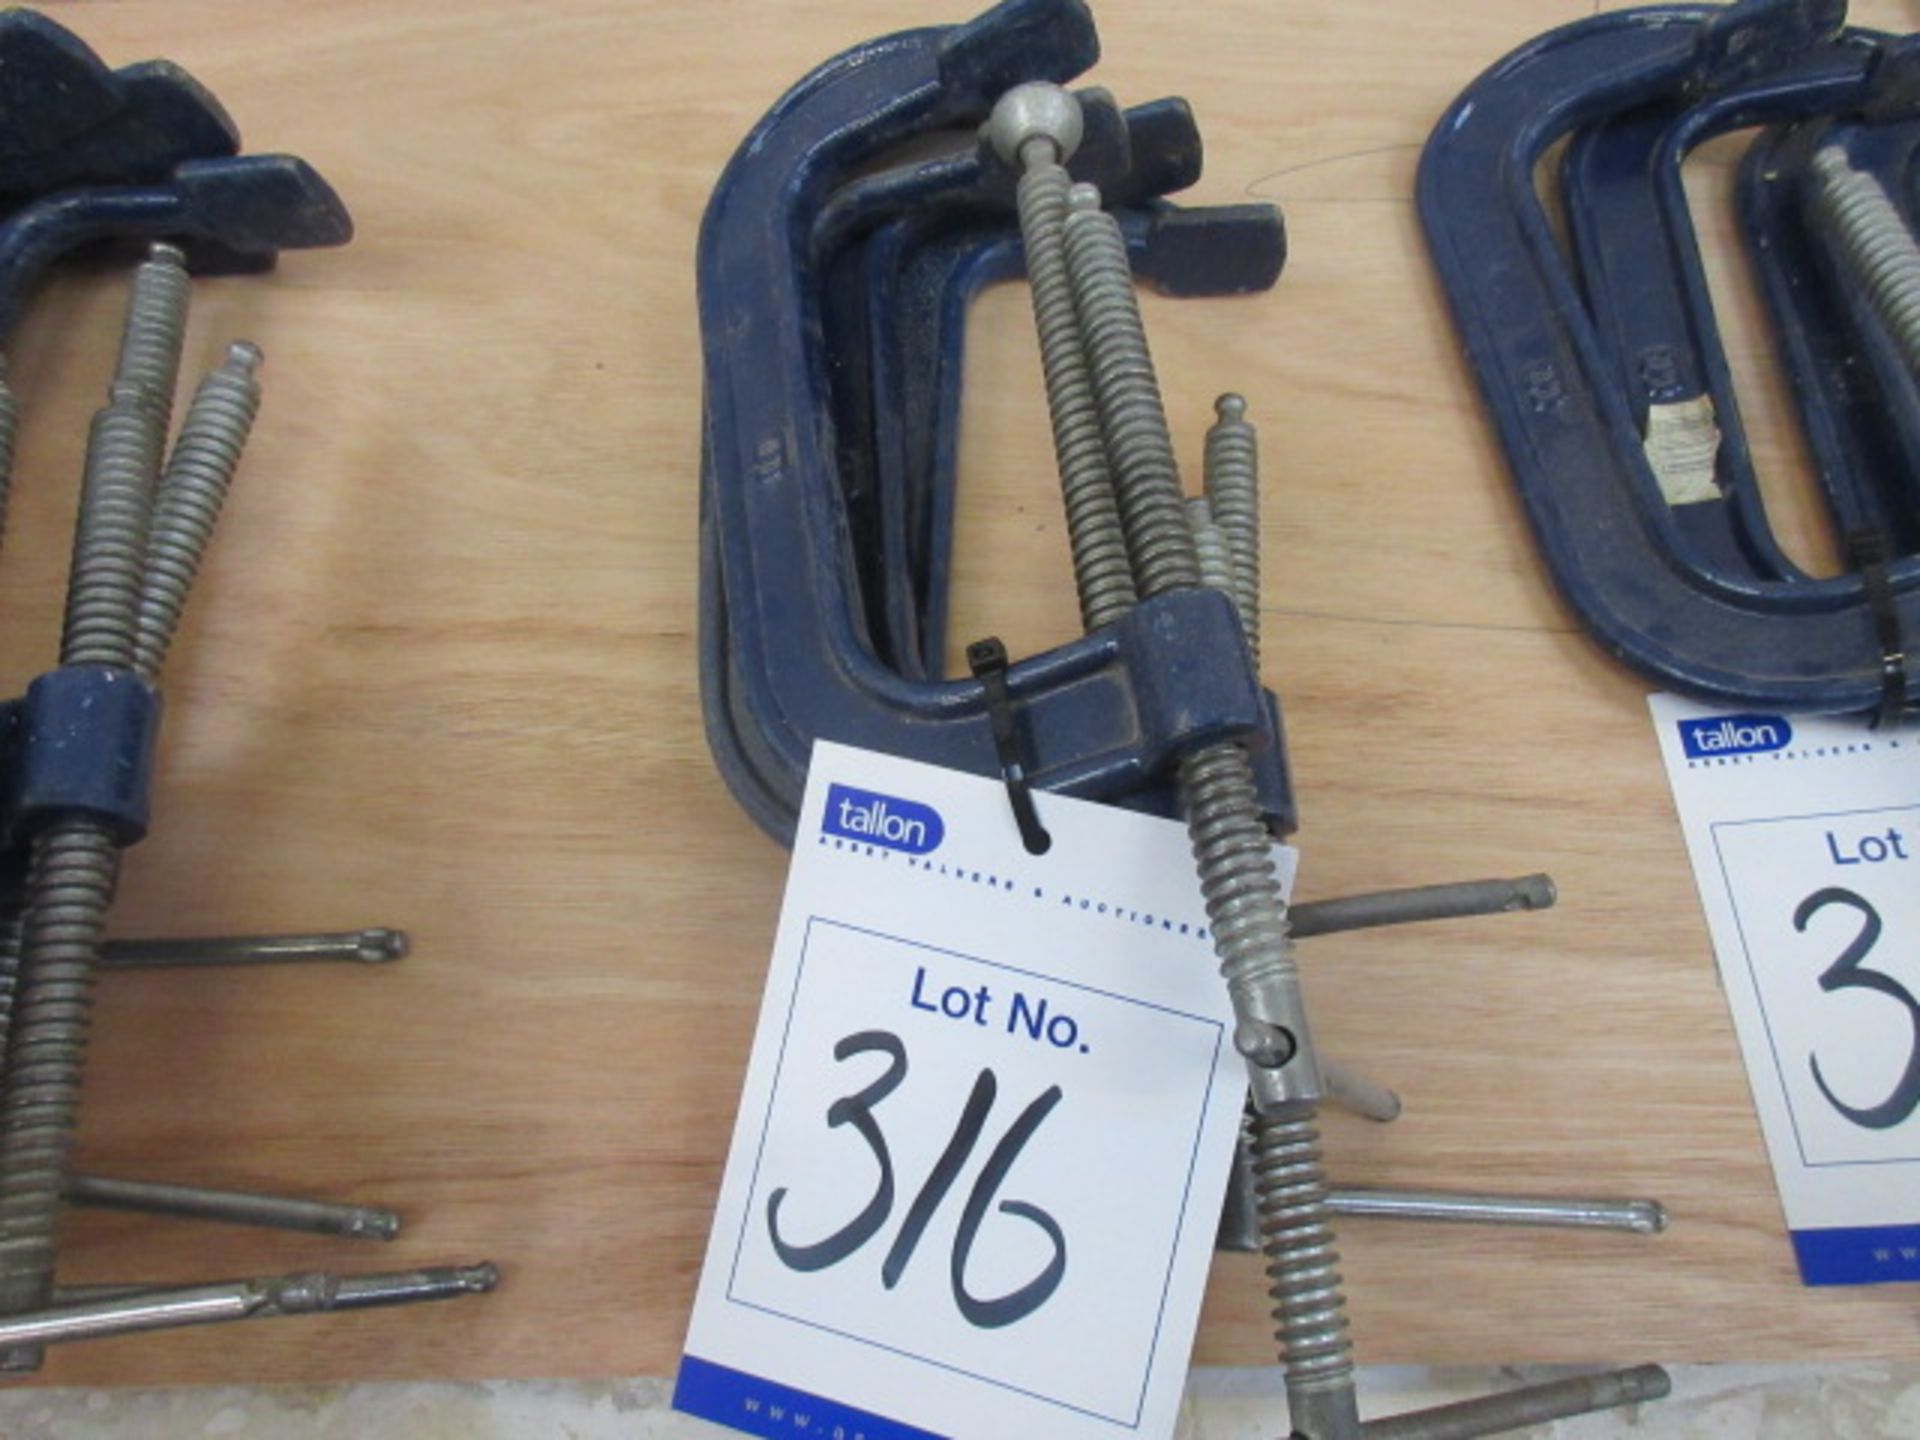 Four 6" 'G' clamps